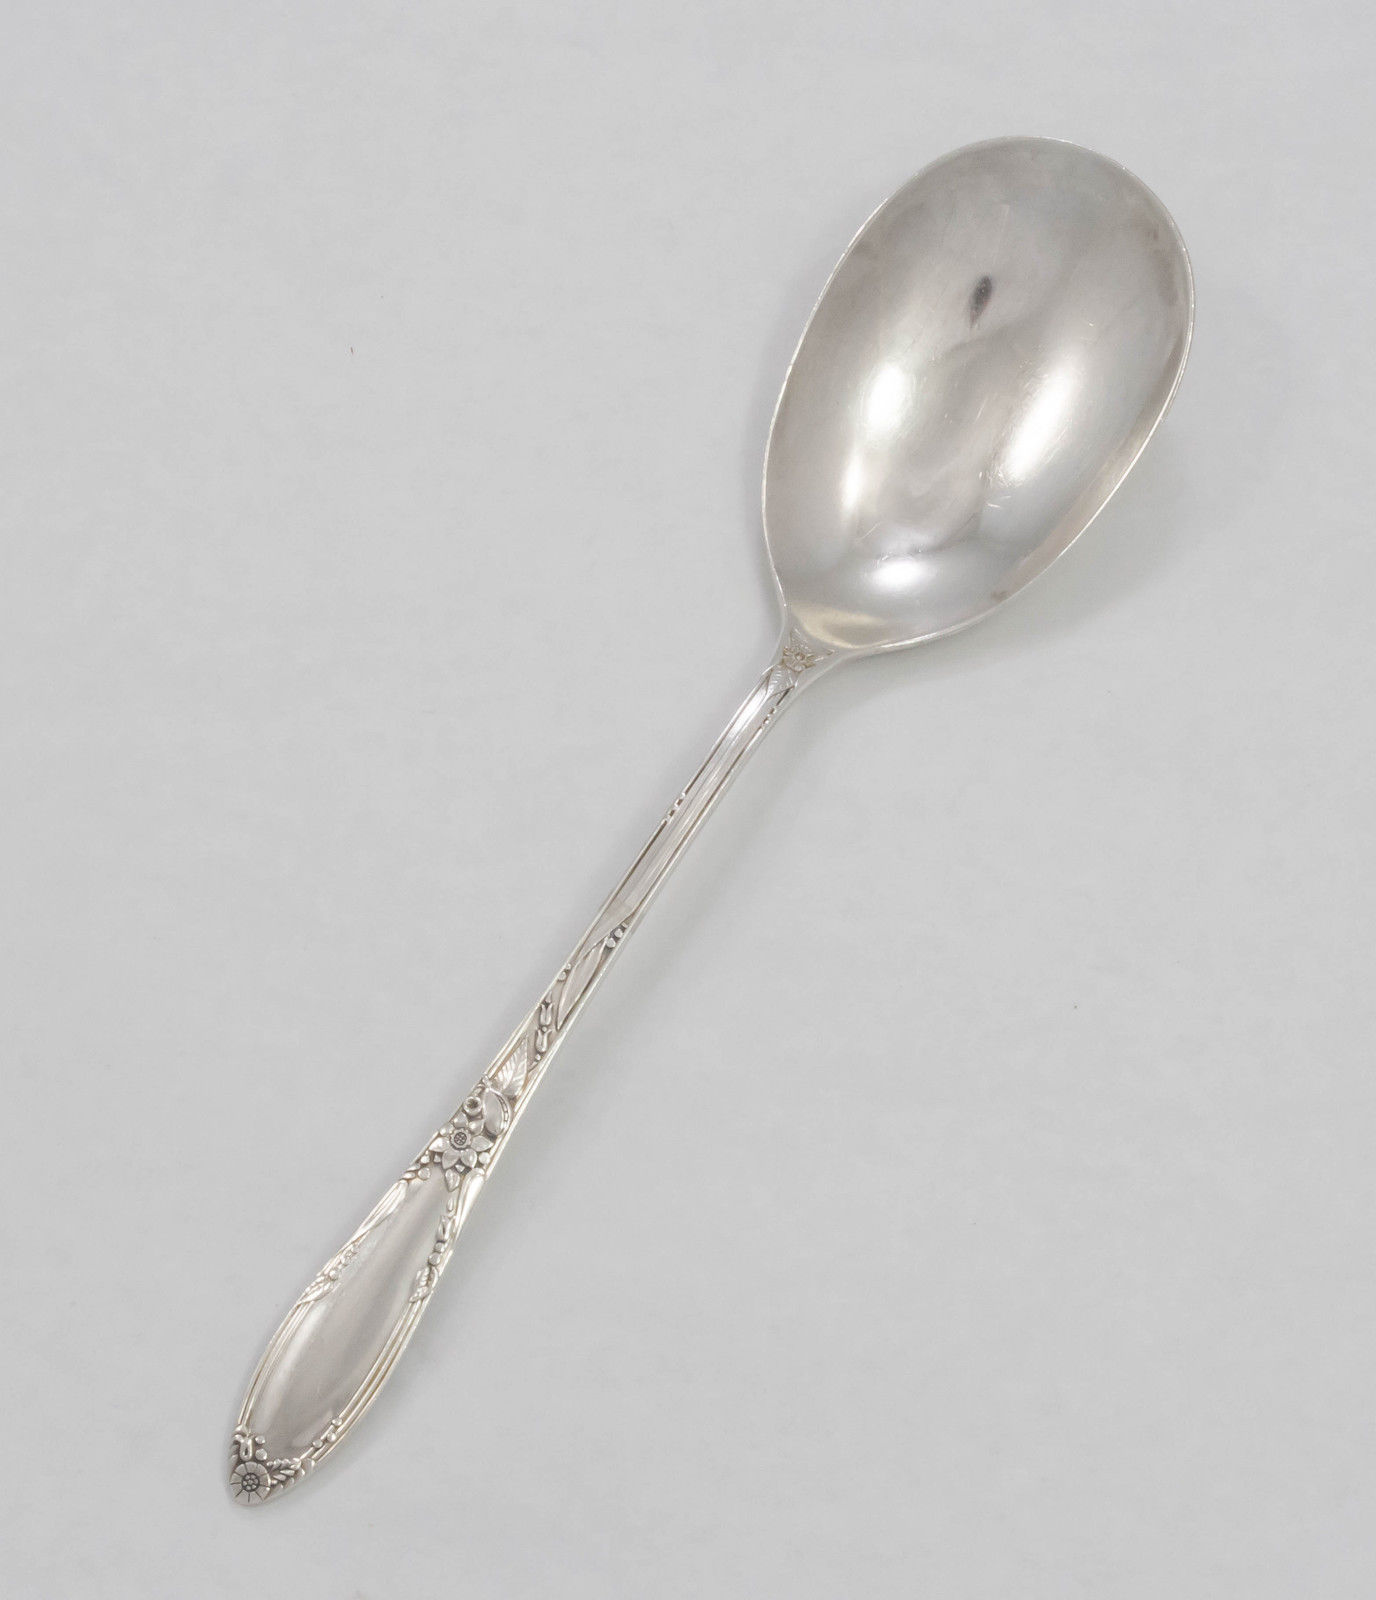 No Mono 8 3//8 Serving Spoon Wallace Rose Point Sterling Silver Tablespoon